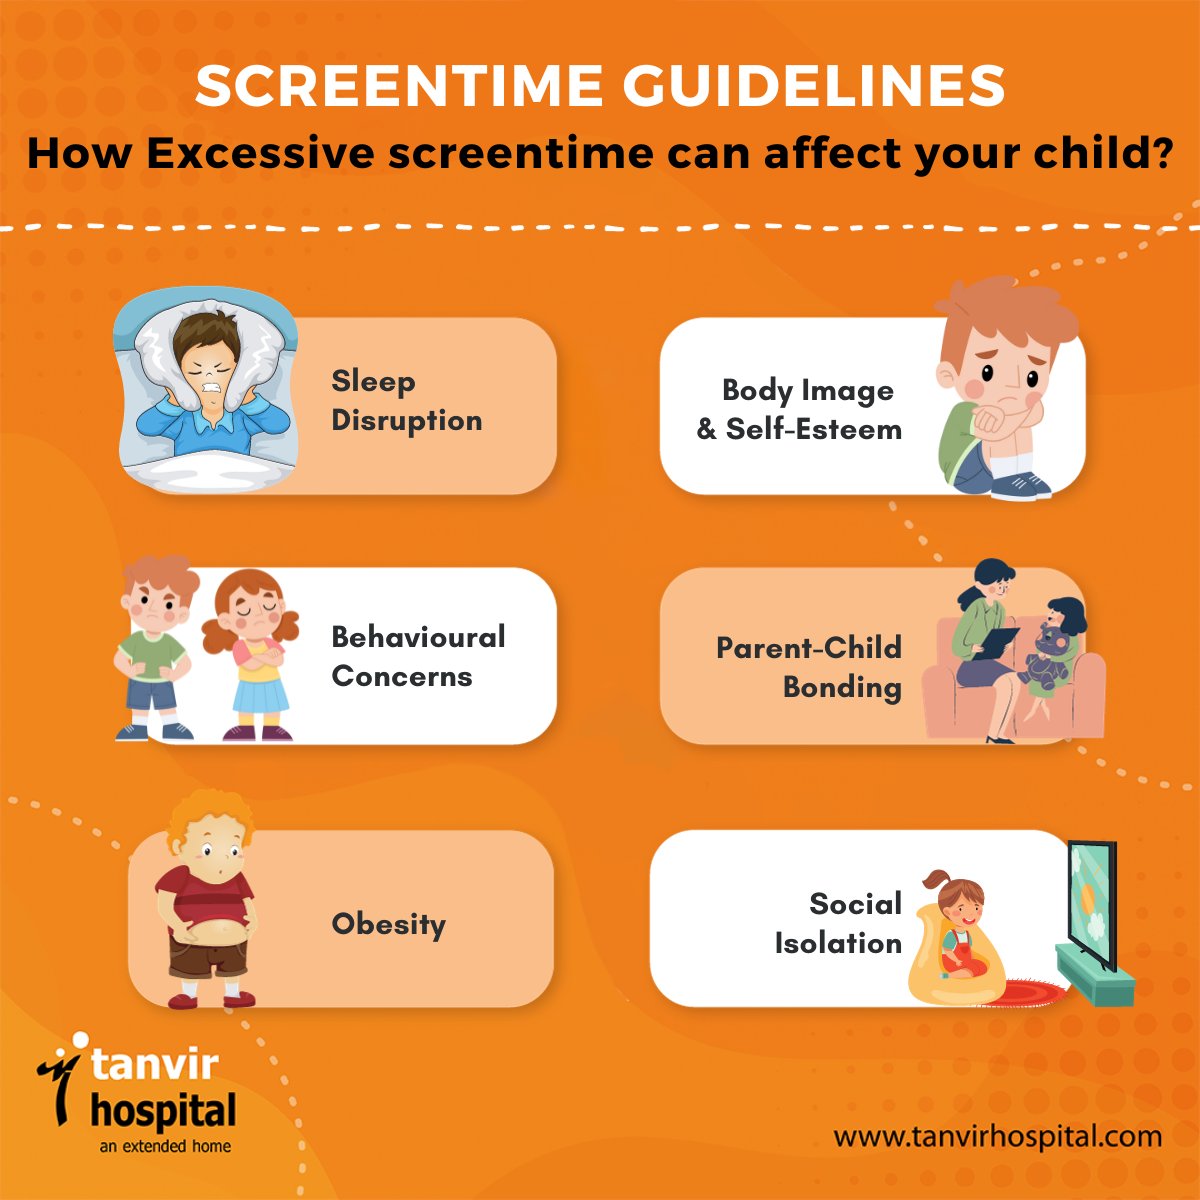 Healthy parenting begins with digital balance. Prioritize your child's well-being through screen-time mindfulness.

#screentimelimits #screentimeforkids #screentimerules #screentimeeyes  #screenaddiction #parenting #childdevelopment #positiveparenting #tanvirhospital